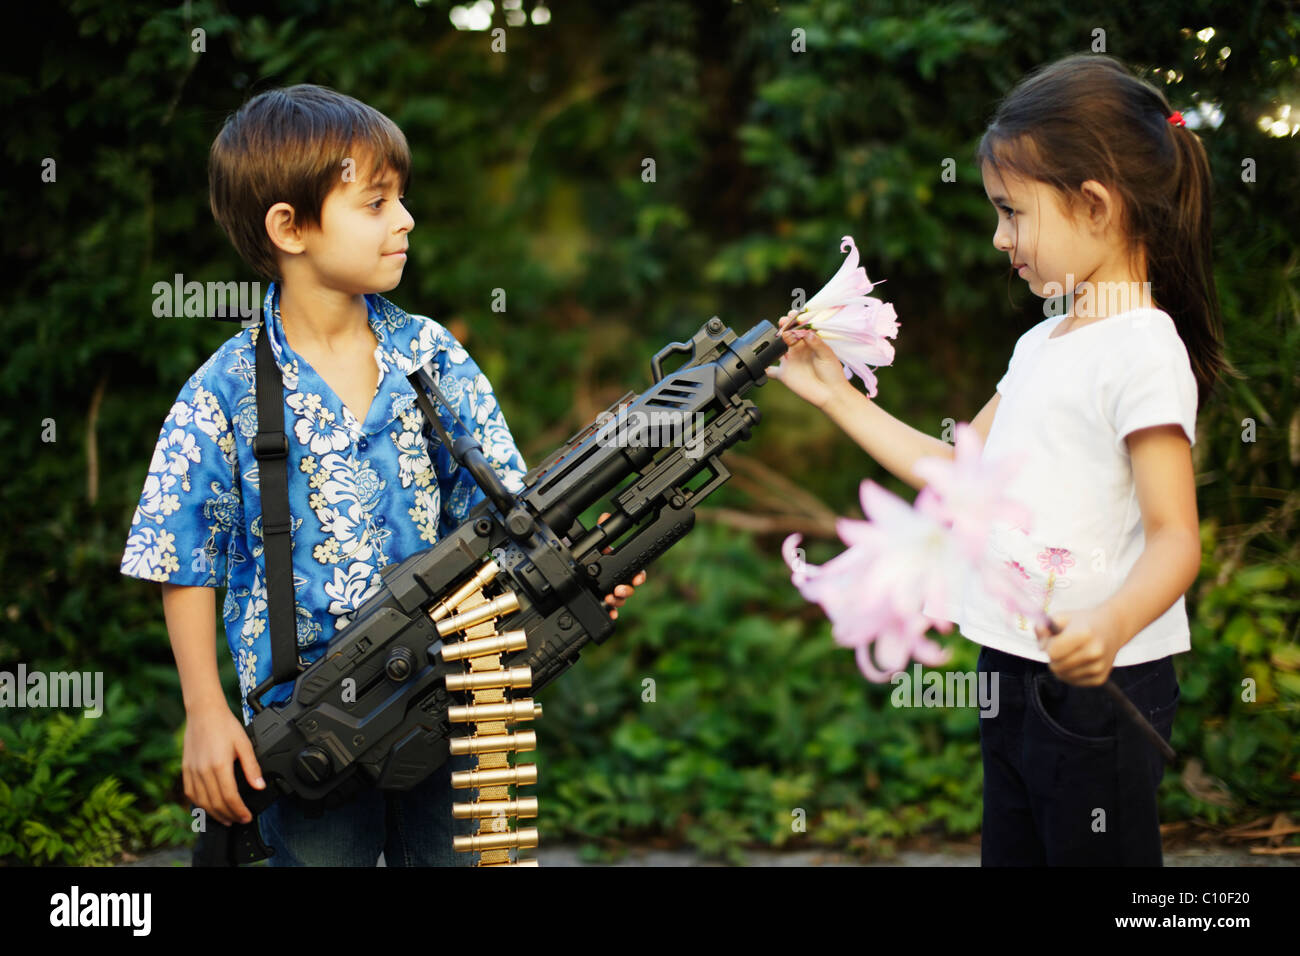 Five year old girl places flowers in barrel of her brother's toy machine gun Stock Photo